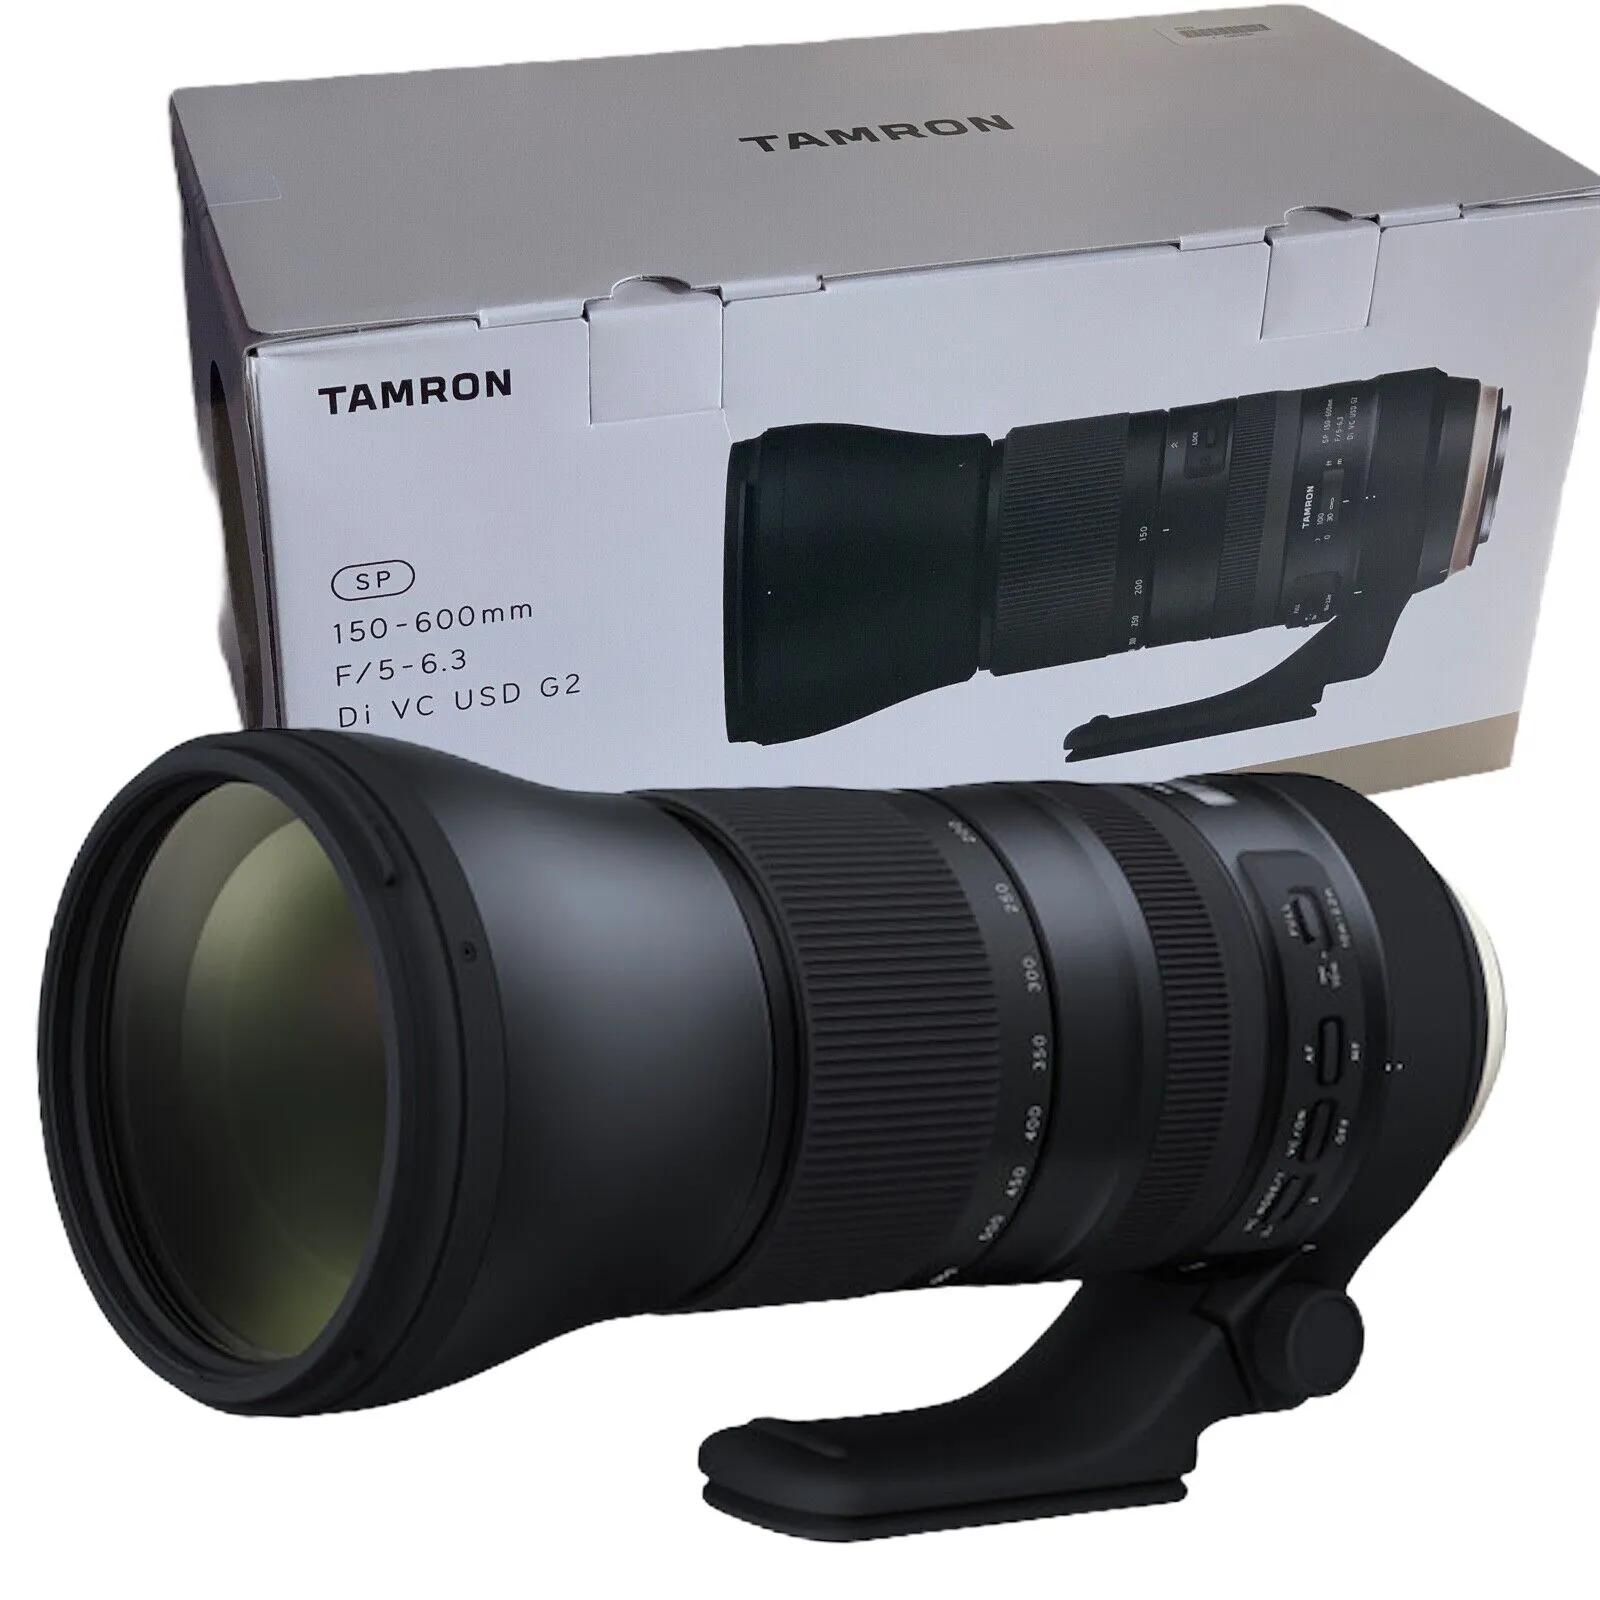 BRAND NEW - Tamron SP A022 150-600mm G2 F/5-6.3 VC Di USD Lens for Nikon F Mount